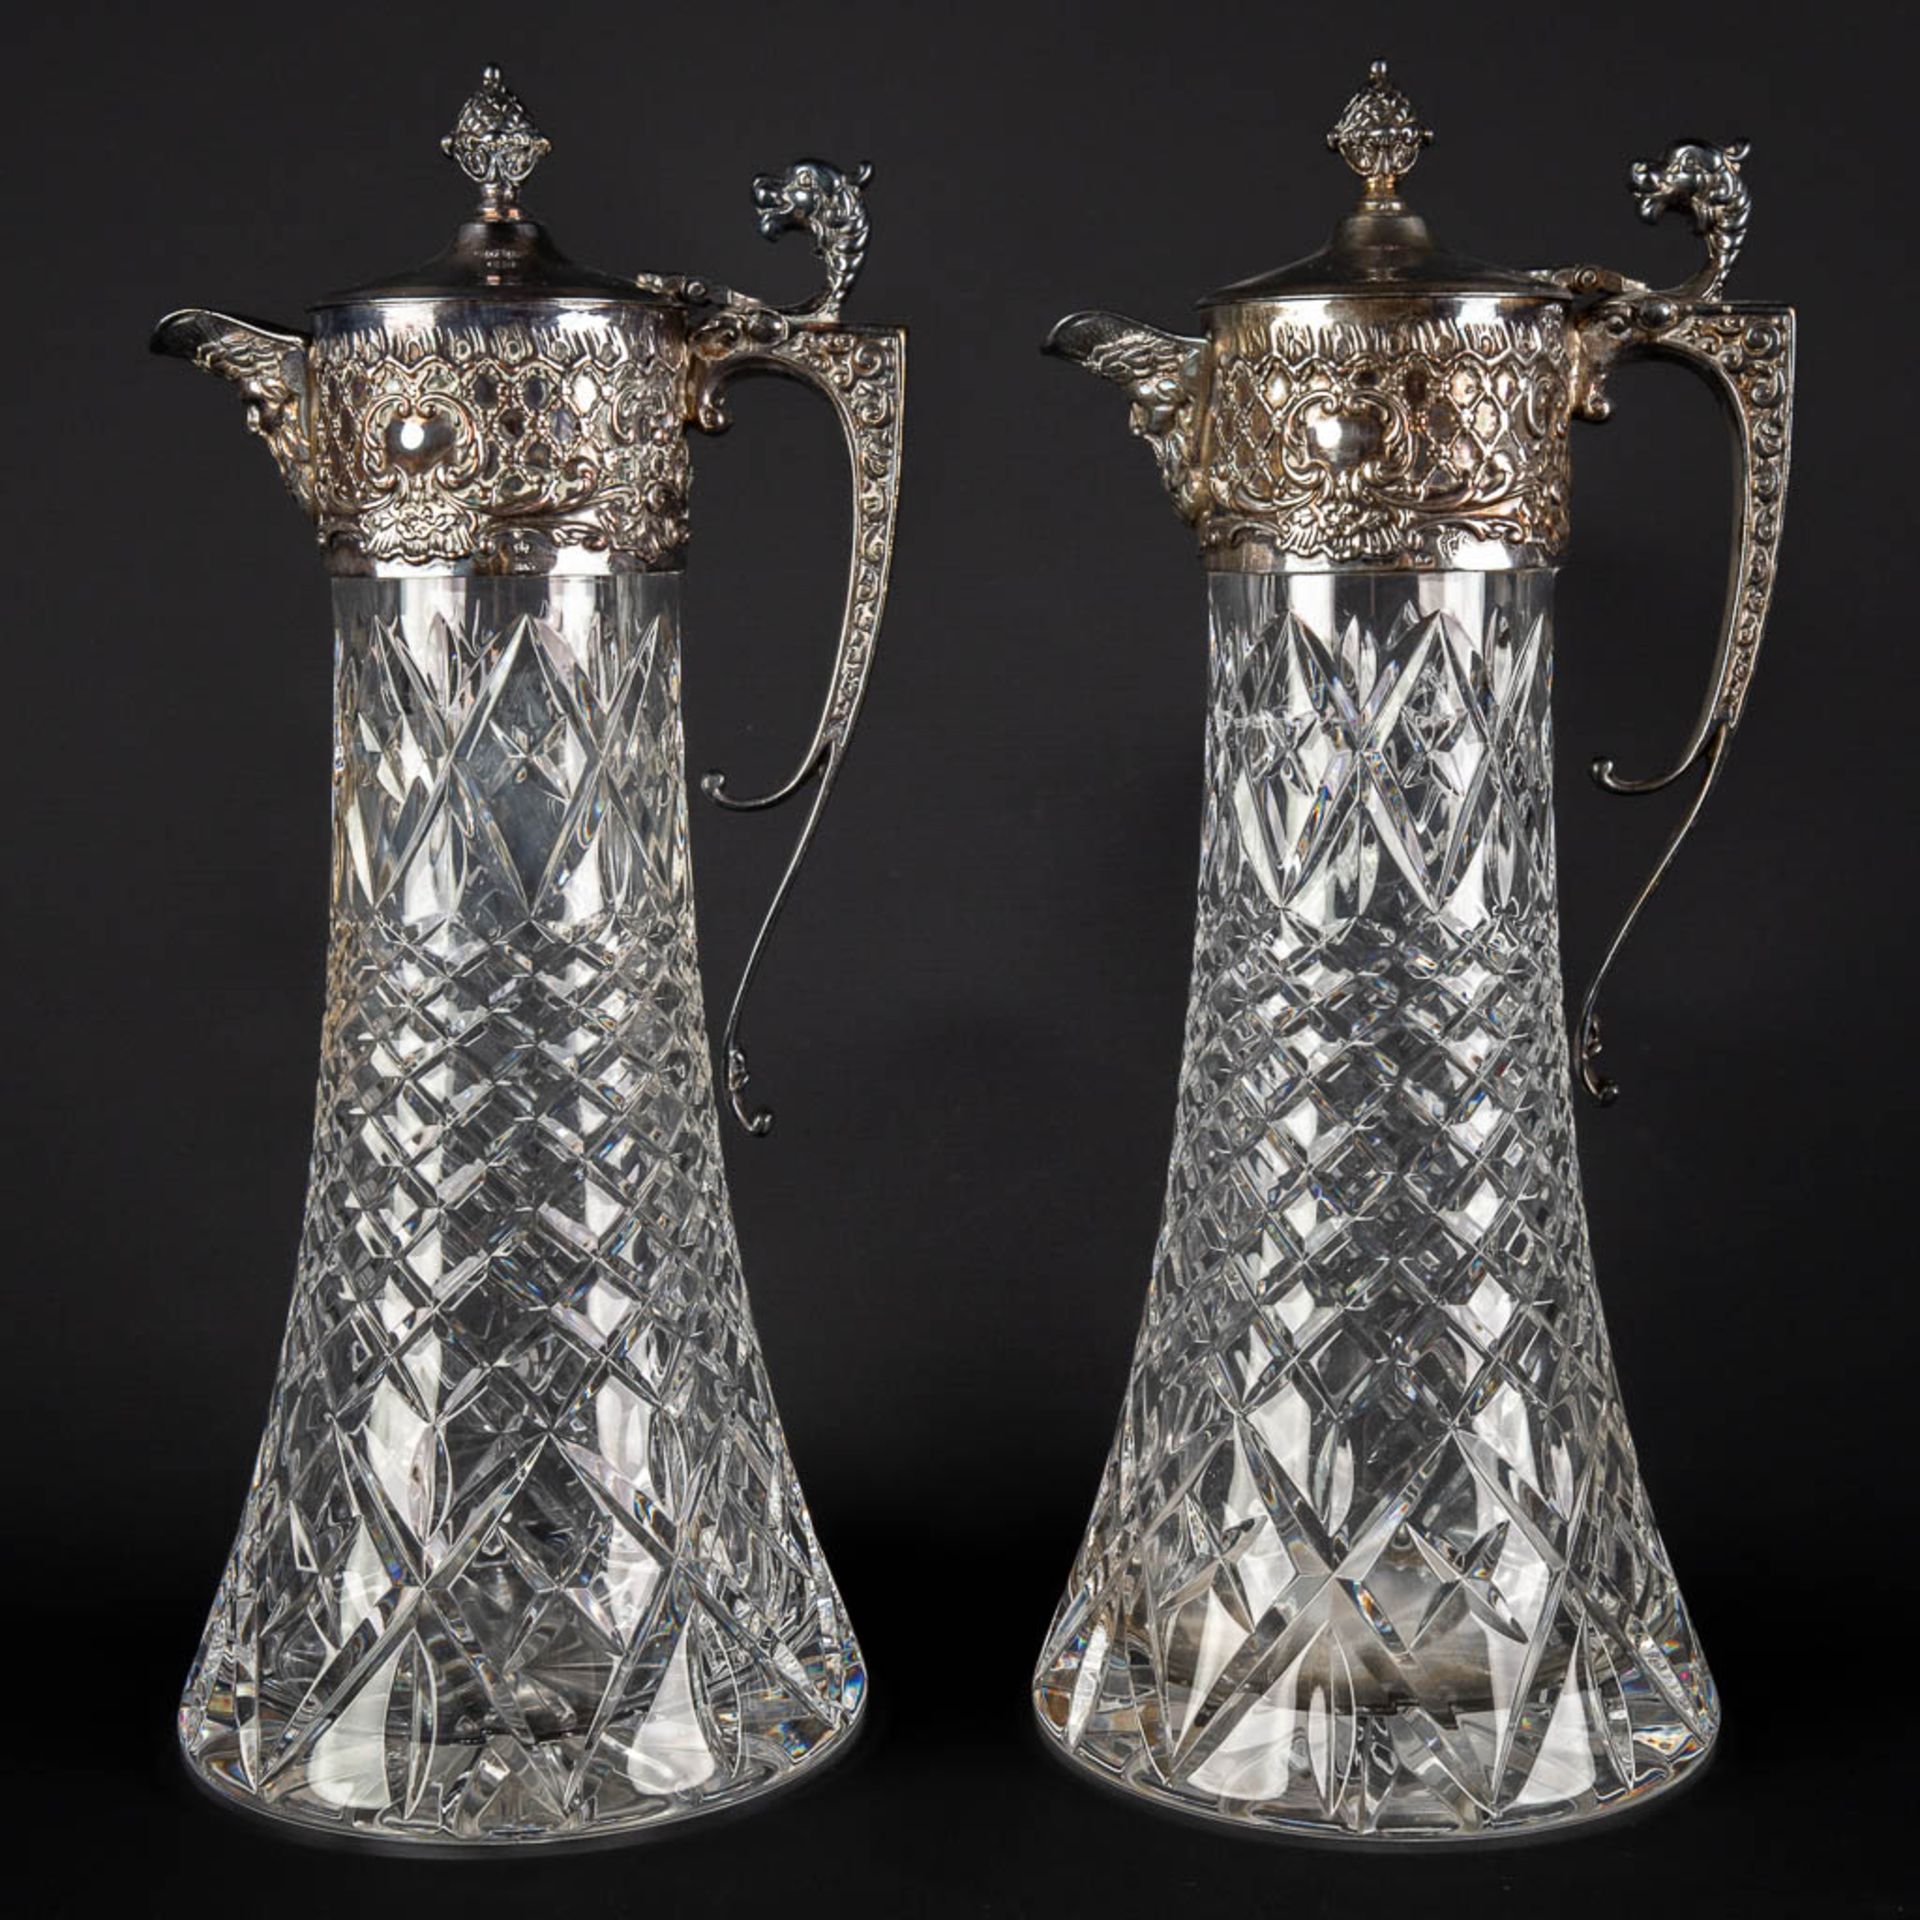 A pair of pitchers, crystal mounted with silver-plated metal. (H:30 x D:12,5 cm) - Image 5 of 13